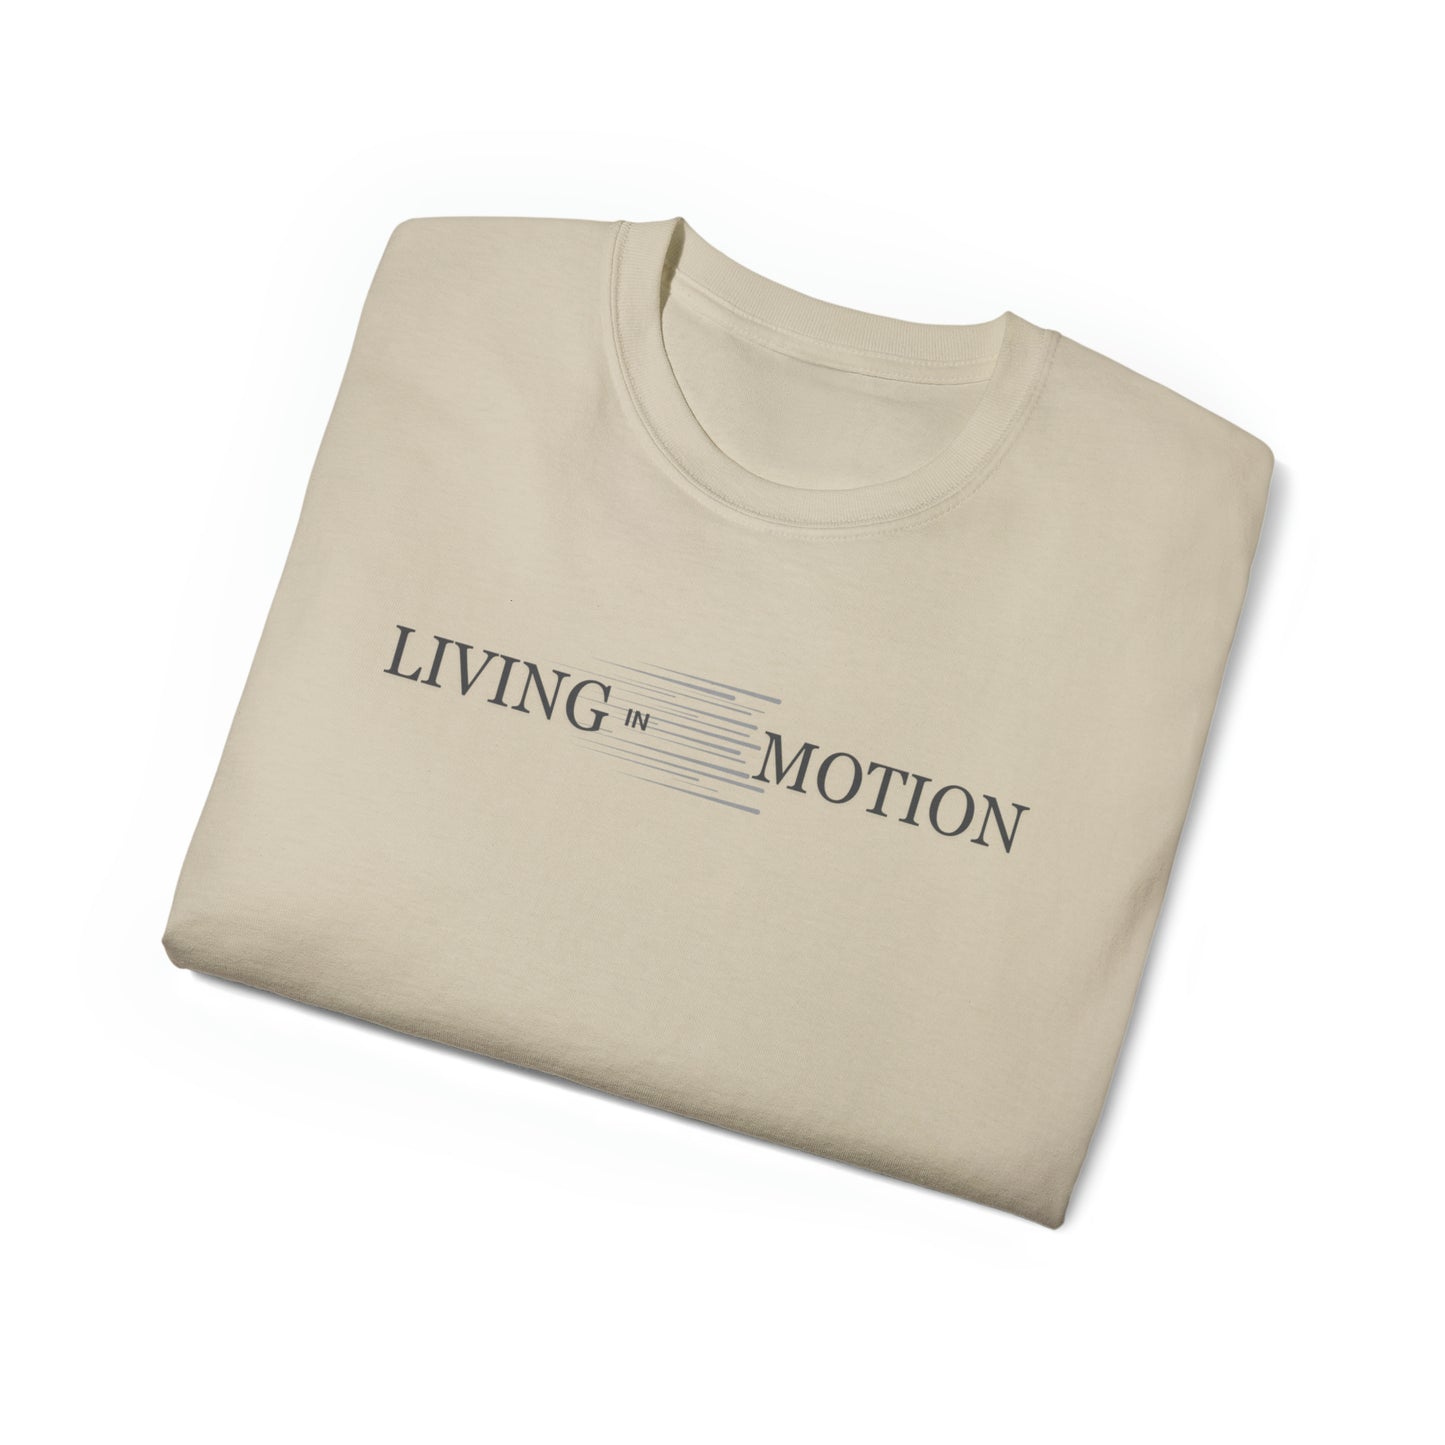 Unisex Ultra Cotton Tee - Living in motion